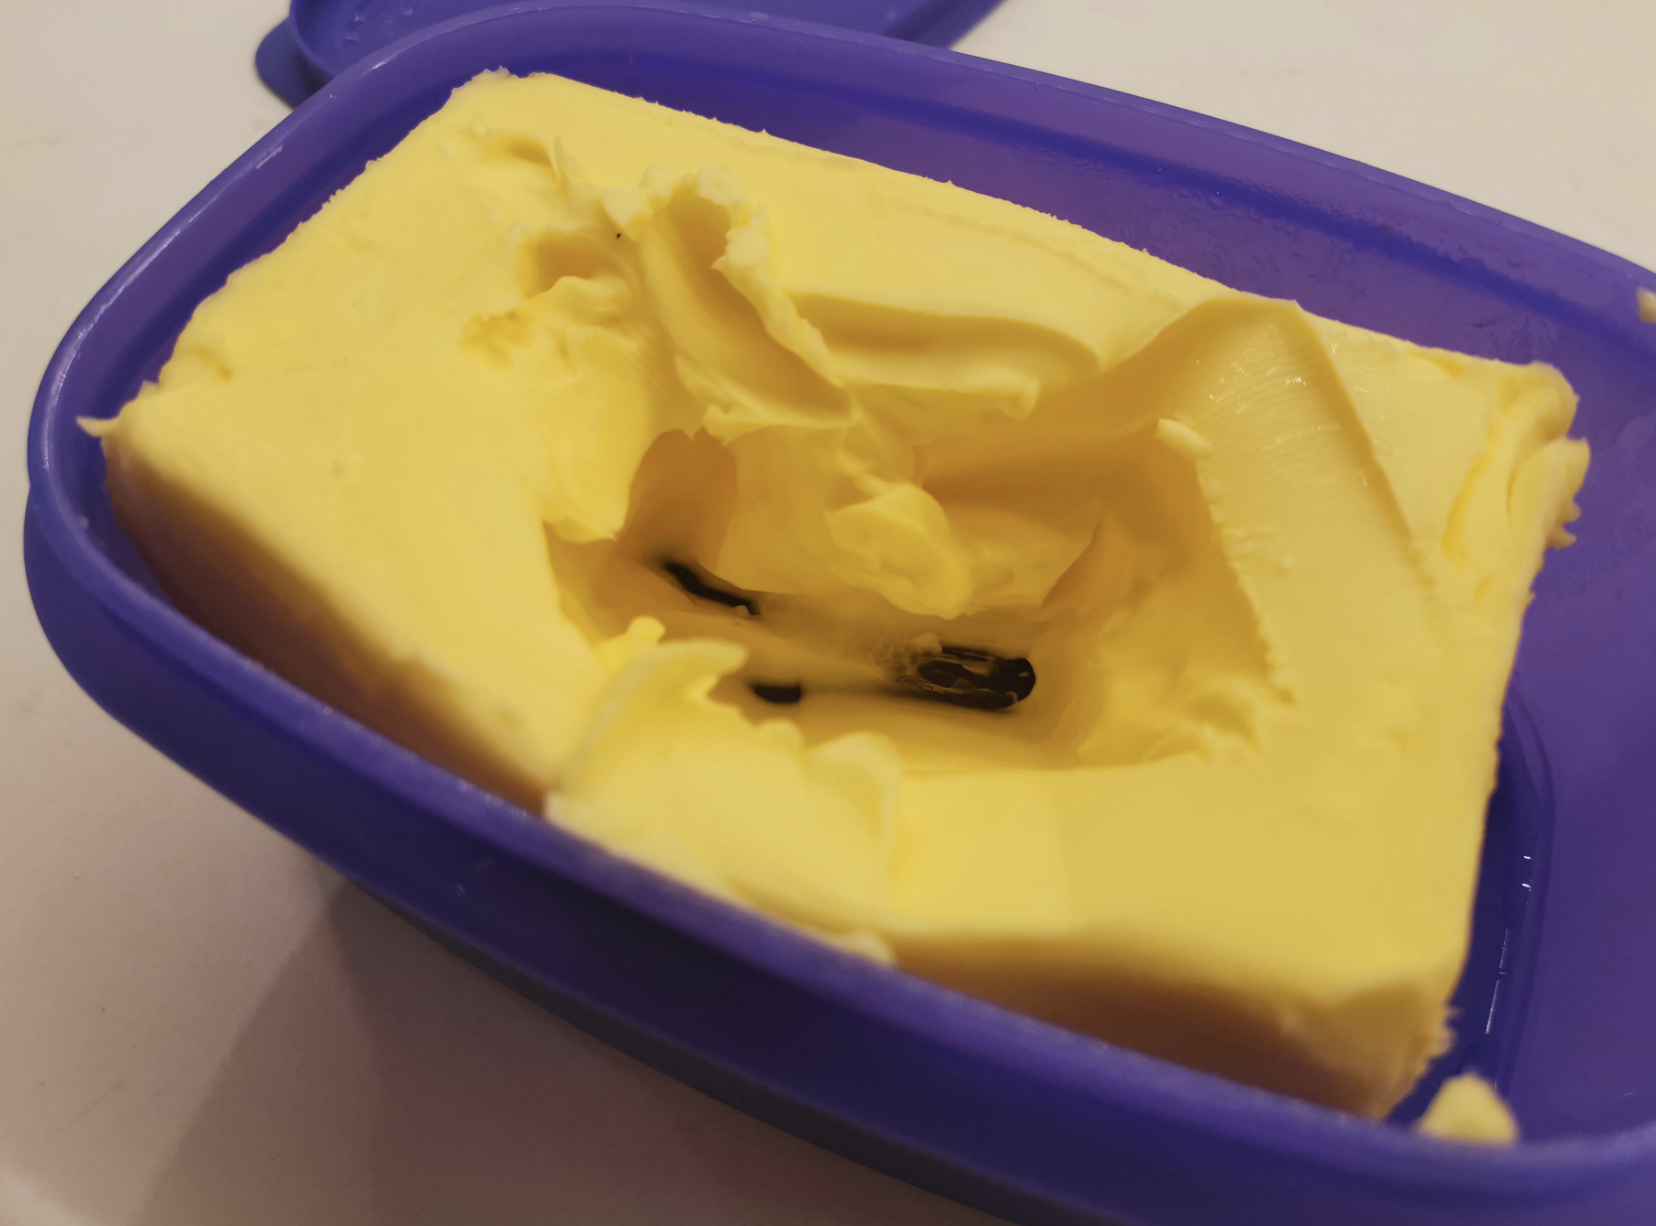 Butter with scoops taken out